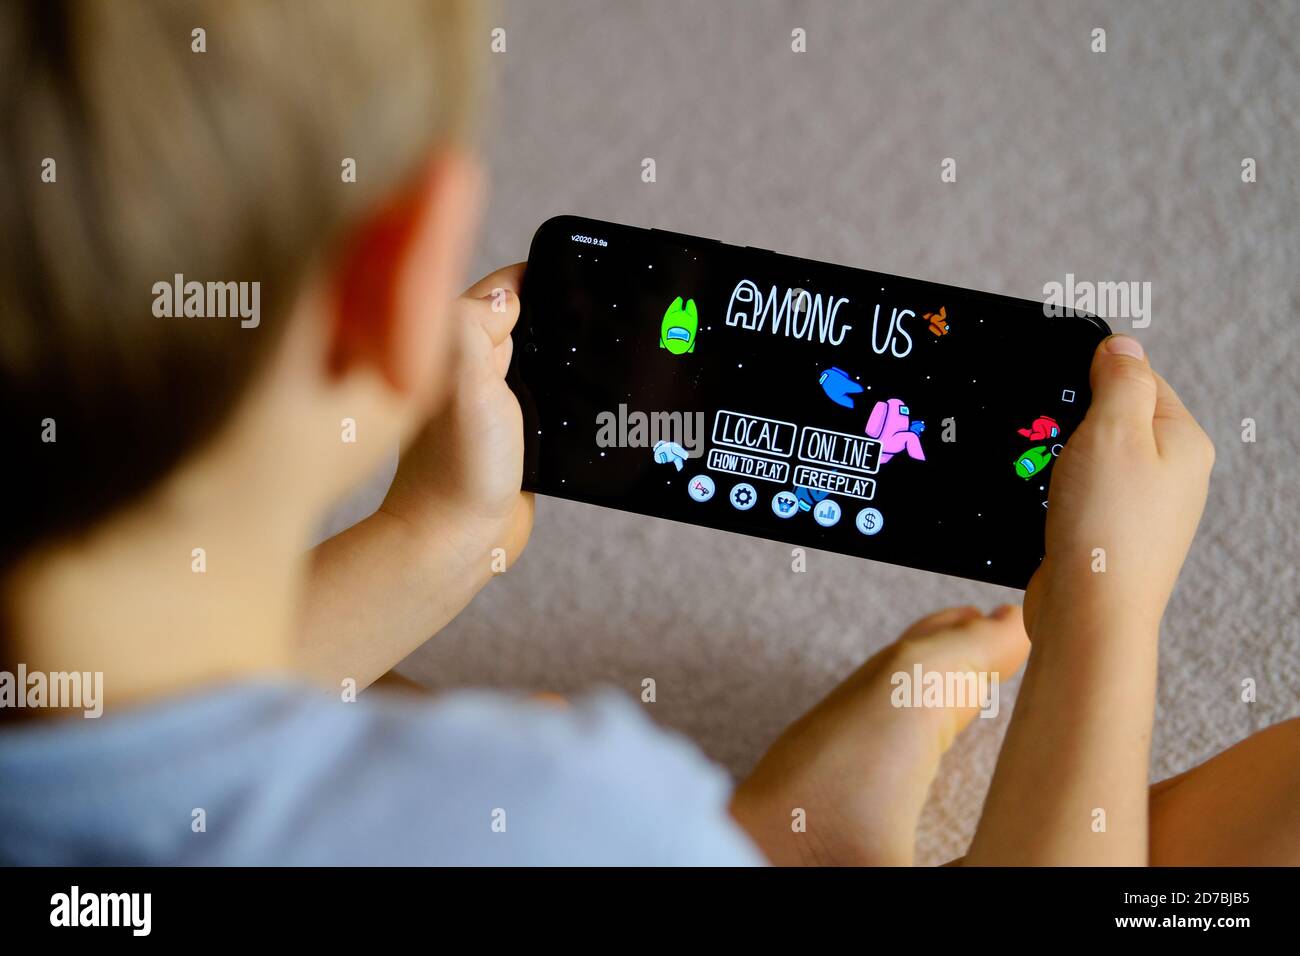 Manchester / United Kingdom - October 21, 2020: Among Us game seen on the smartphone screen and child playing it. New popular app. Stock Photo